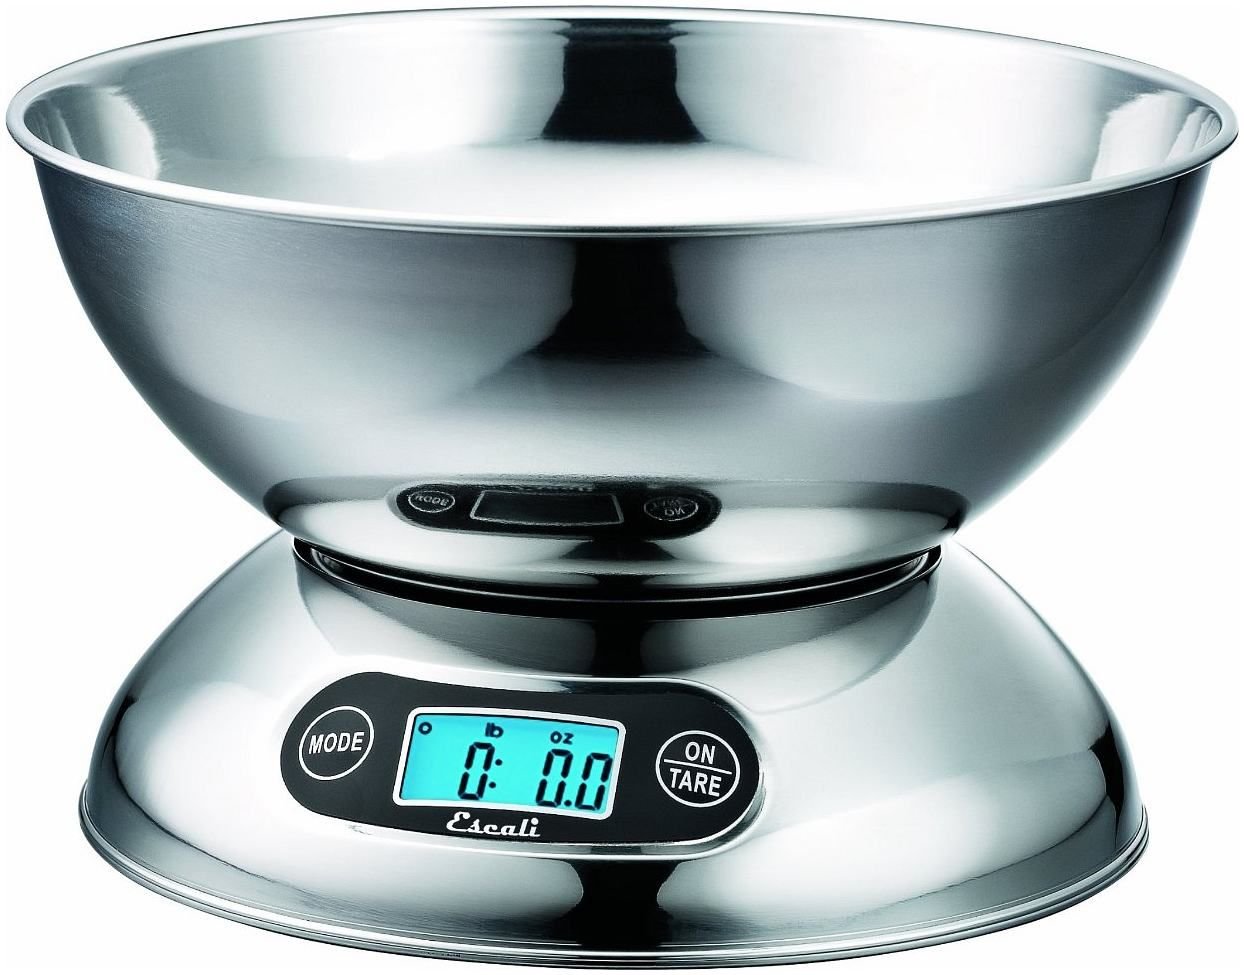 https://cdn.everythingkitchens.com/media/catalog/product/cache/70d878061ea71e5b62358b2b67547186/e/s/escali-rondo-stainless-steel-kitchen-food-scale-r115-compressed.jpg